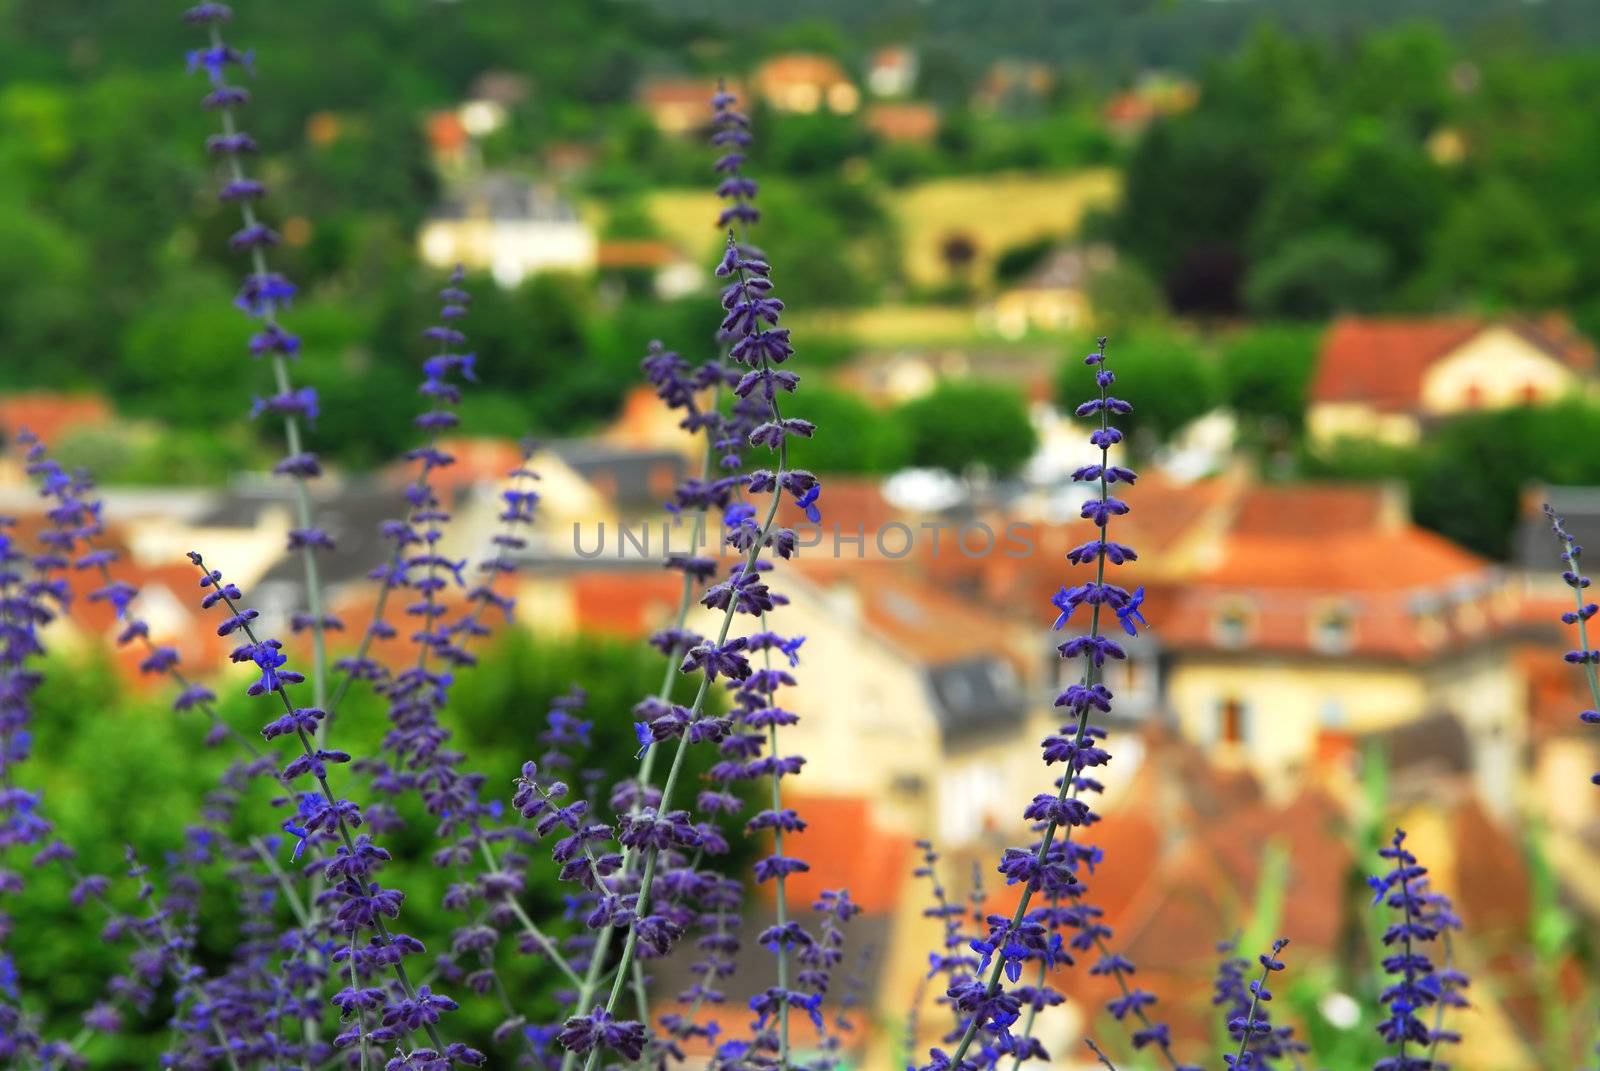 Rooftops in Sarlat, France by elenathewise